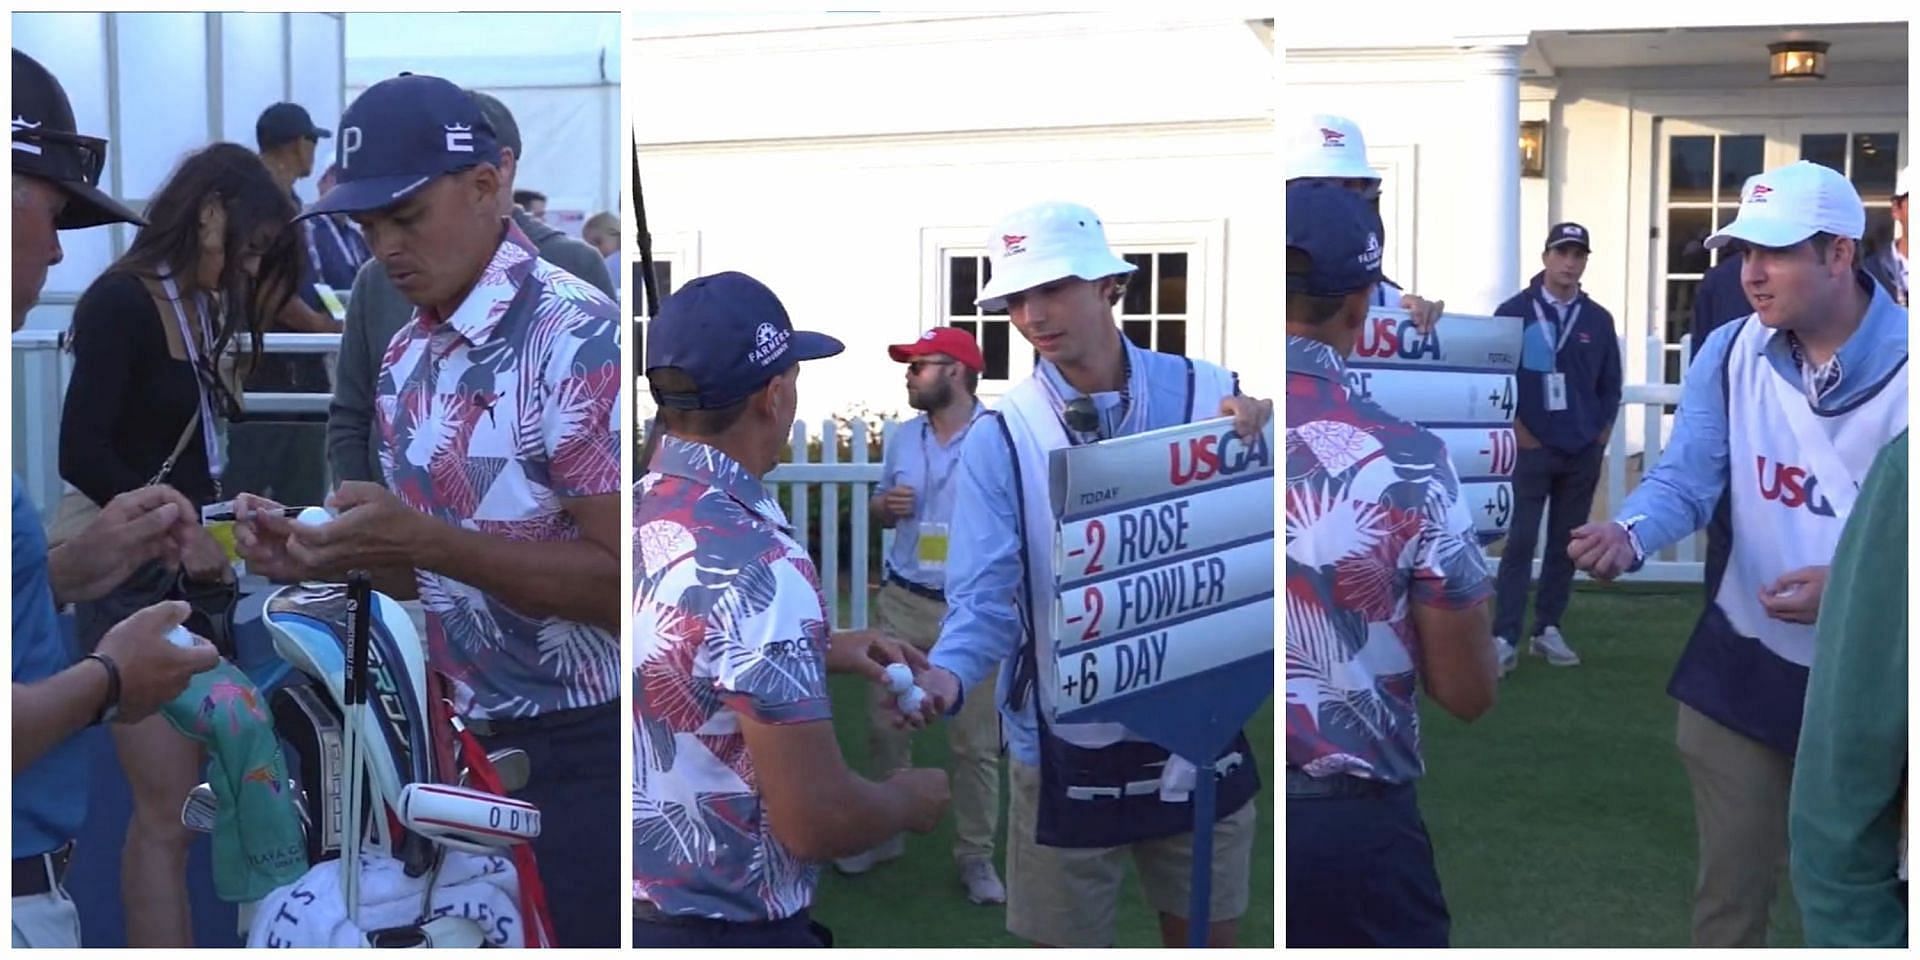 Fowler was seen gifting signed balls to the standard bearers after taking a 36-hole lead at the US Open(Image via Twitter.com/PGATour)